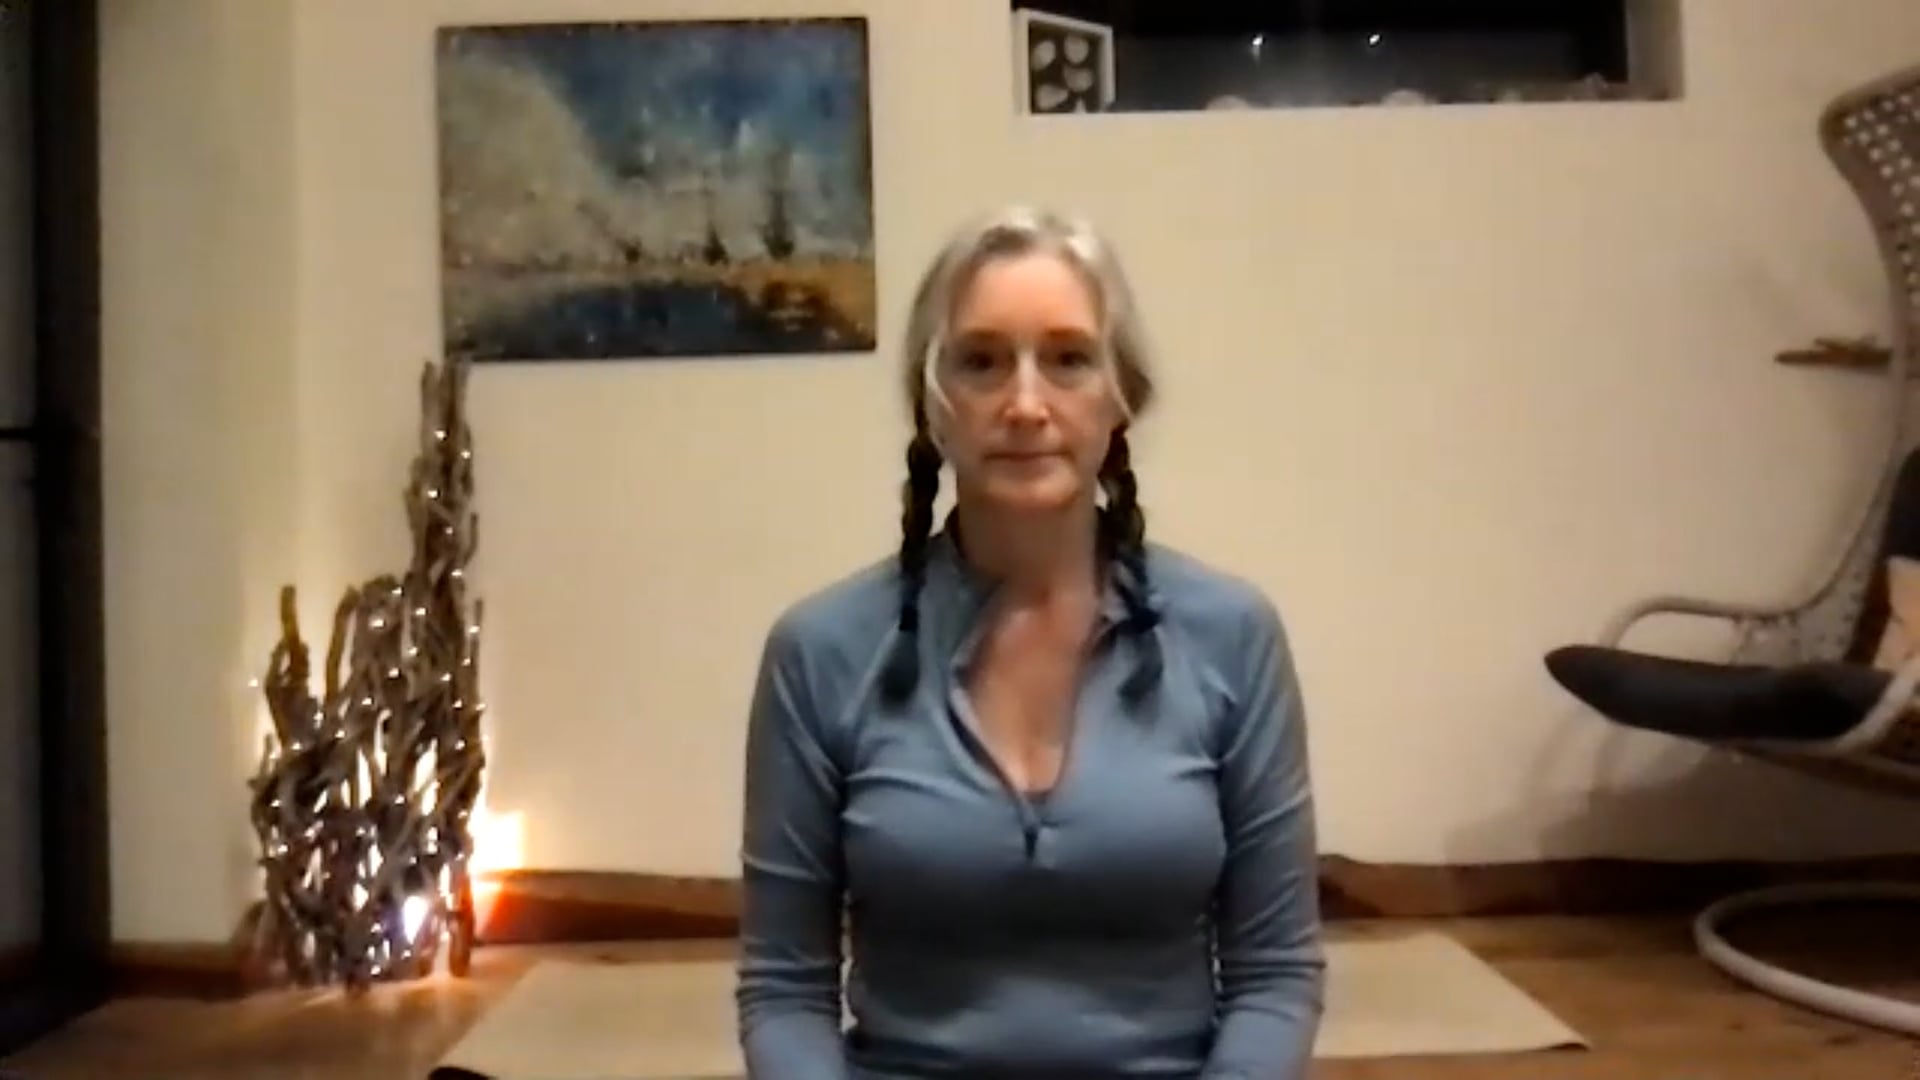 Mindful practices wk 6.mp4